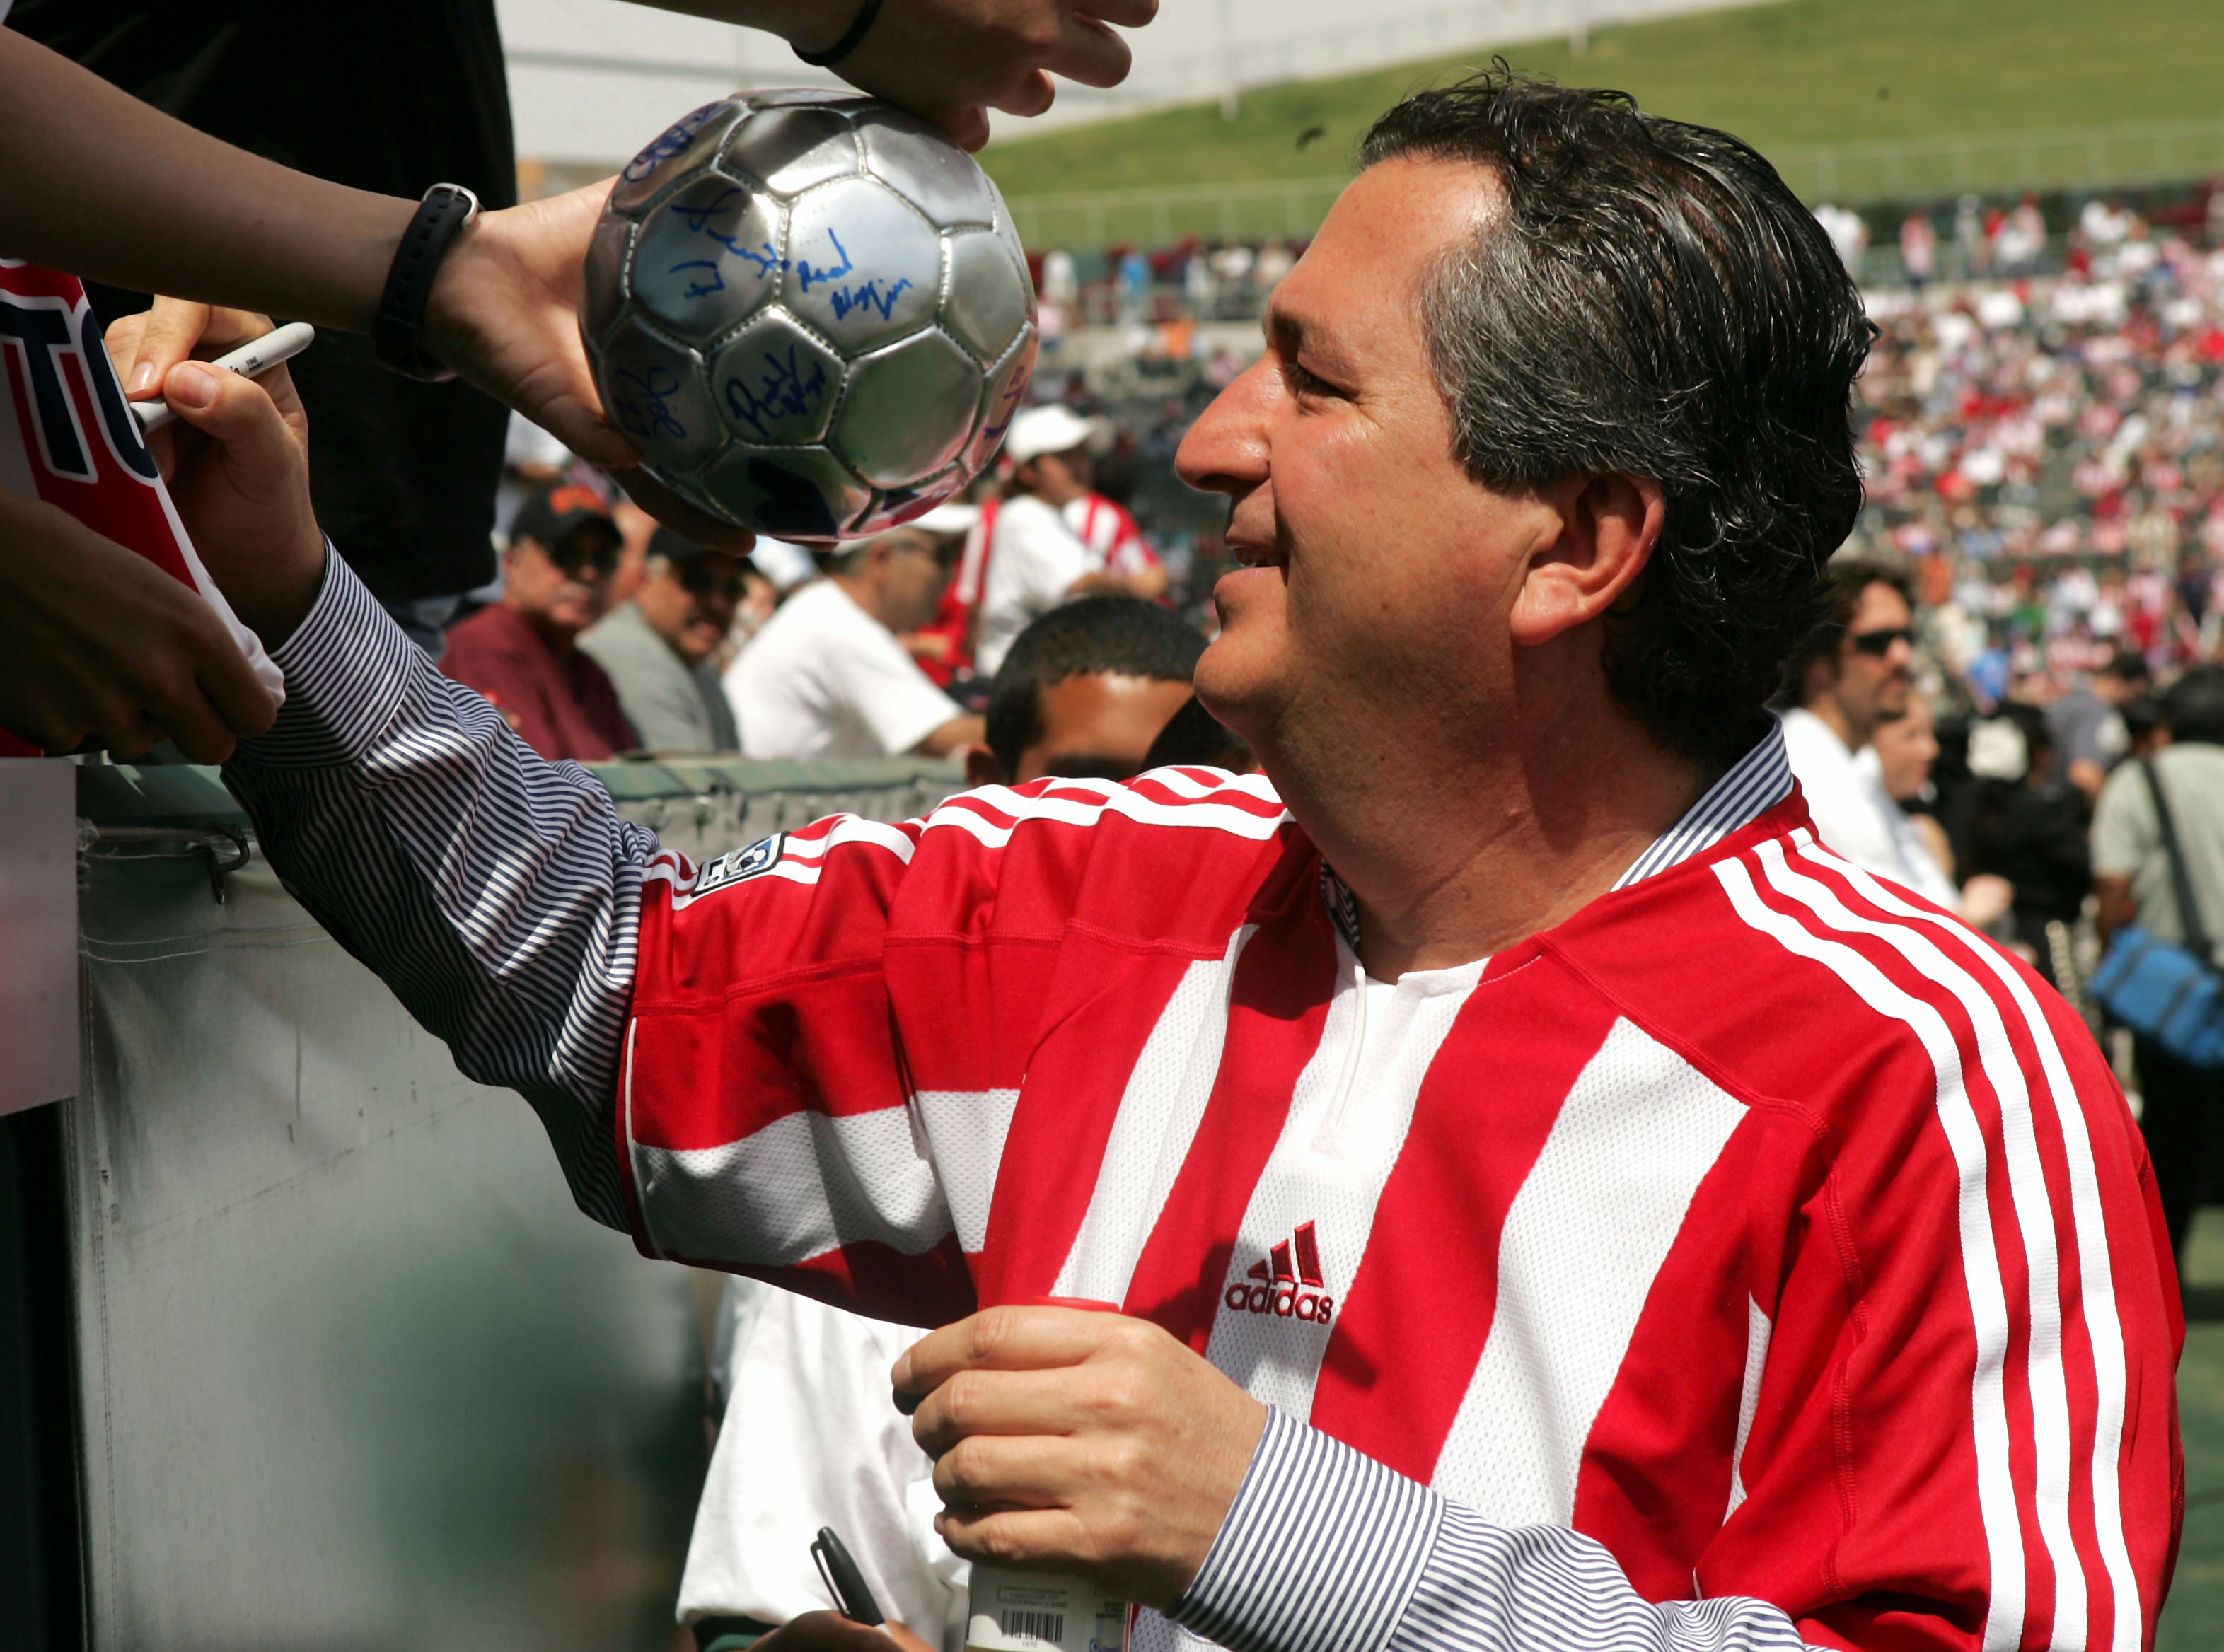 CARSON, CA - APRIL 2:  Owner Jorge Vergara of Chivas USA signs autographs before their inaugural Major League Soccer match with DC United on April 2, 2005 at the Home Depot Center in Carson, California. DC United won 2-0.  (Photo by Stephen Dunn/Getty Images)